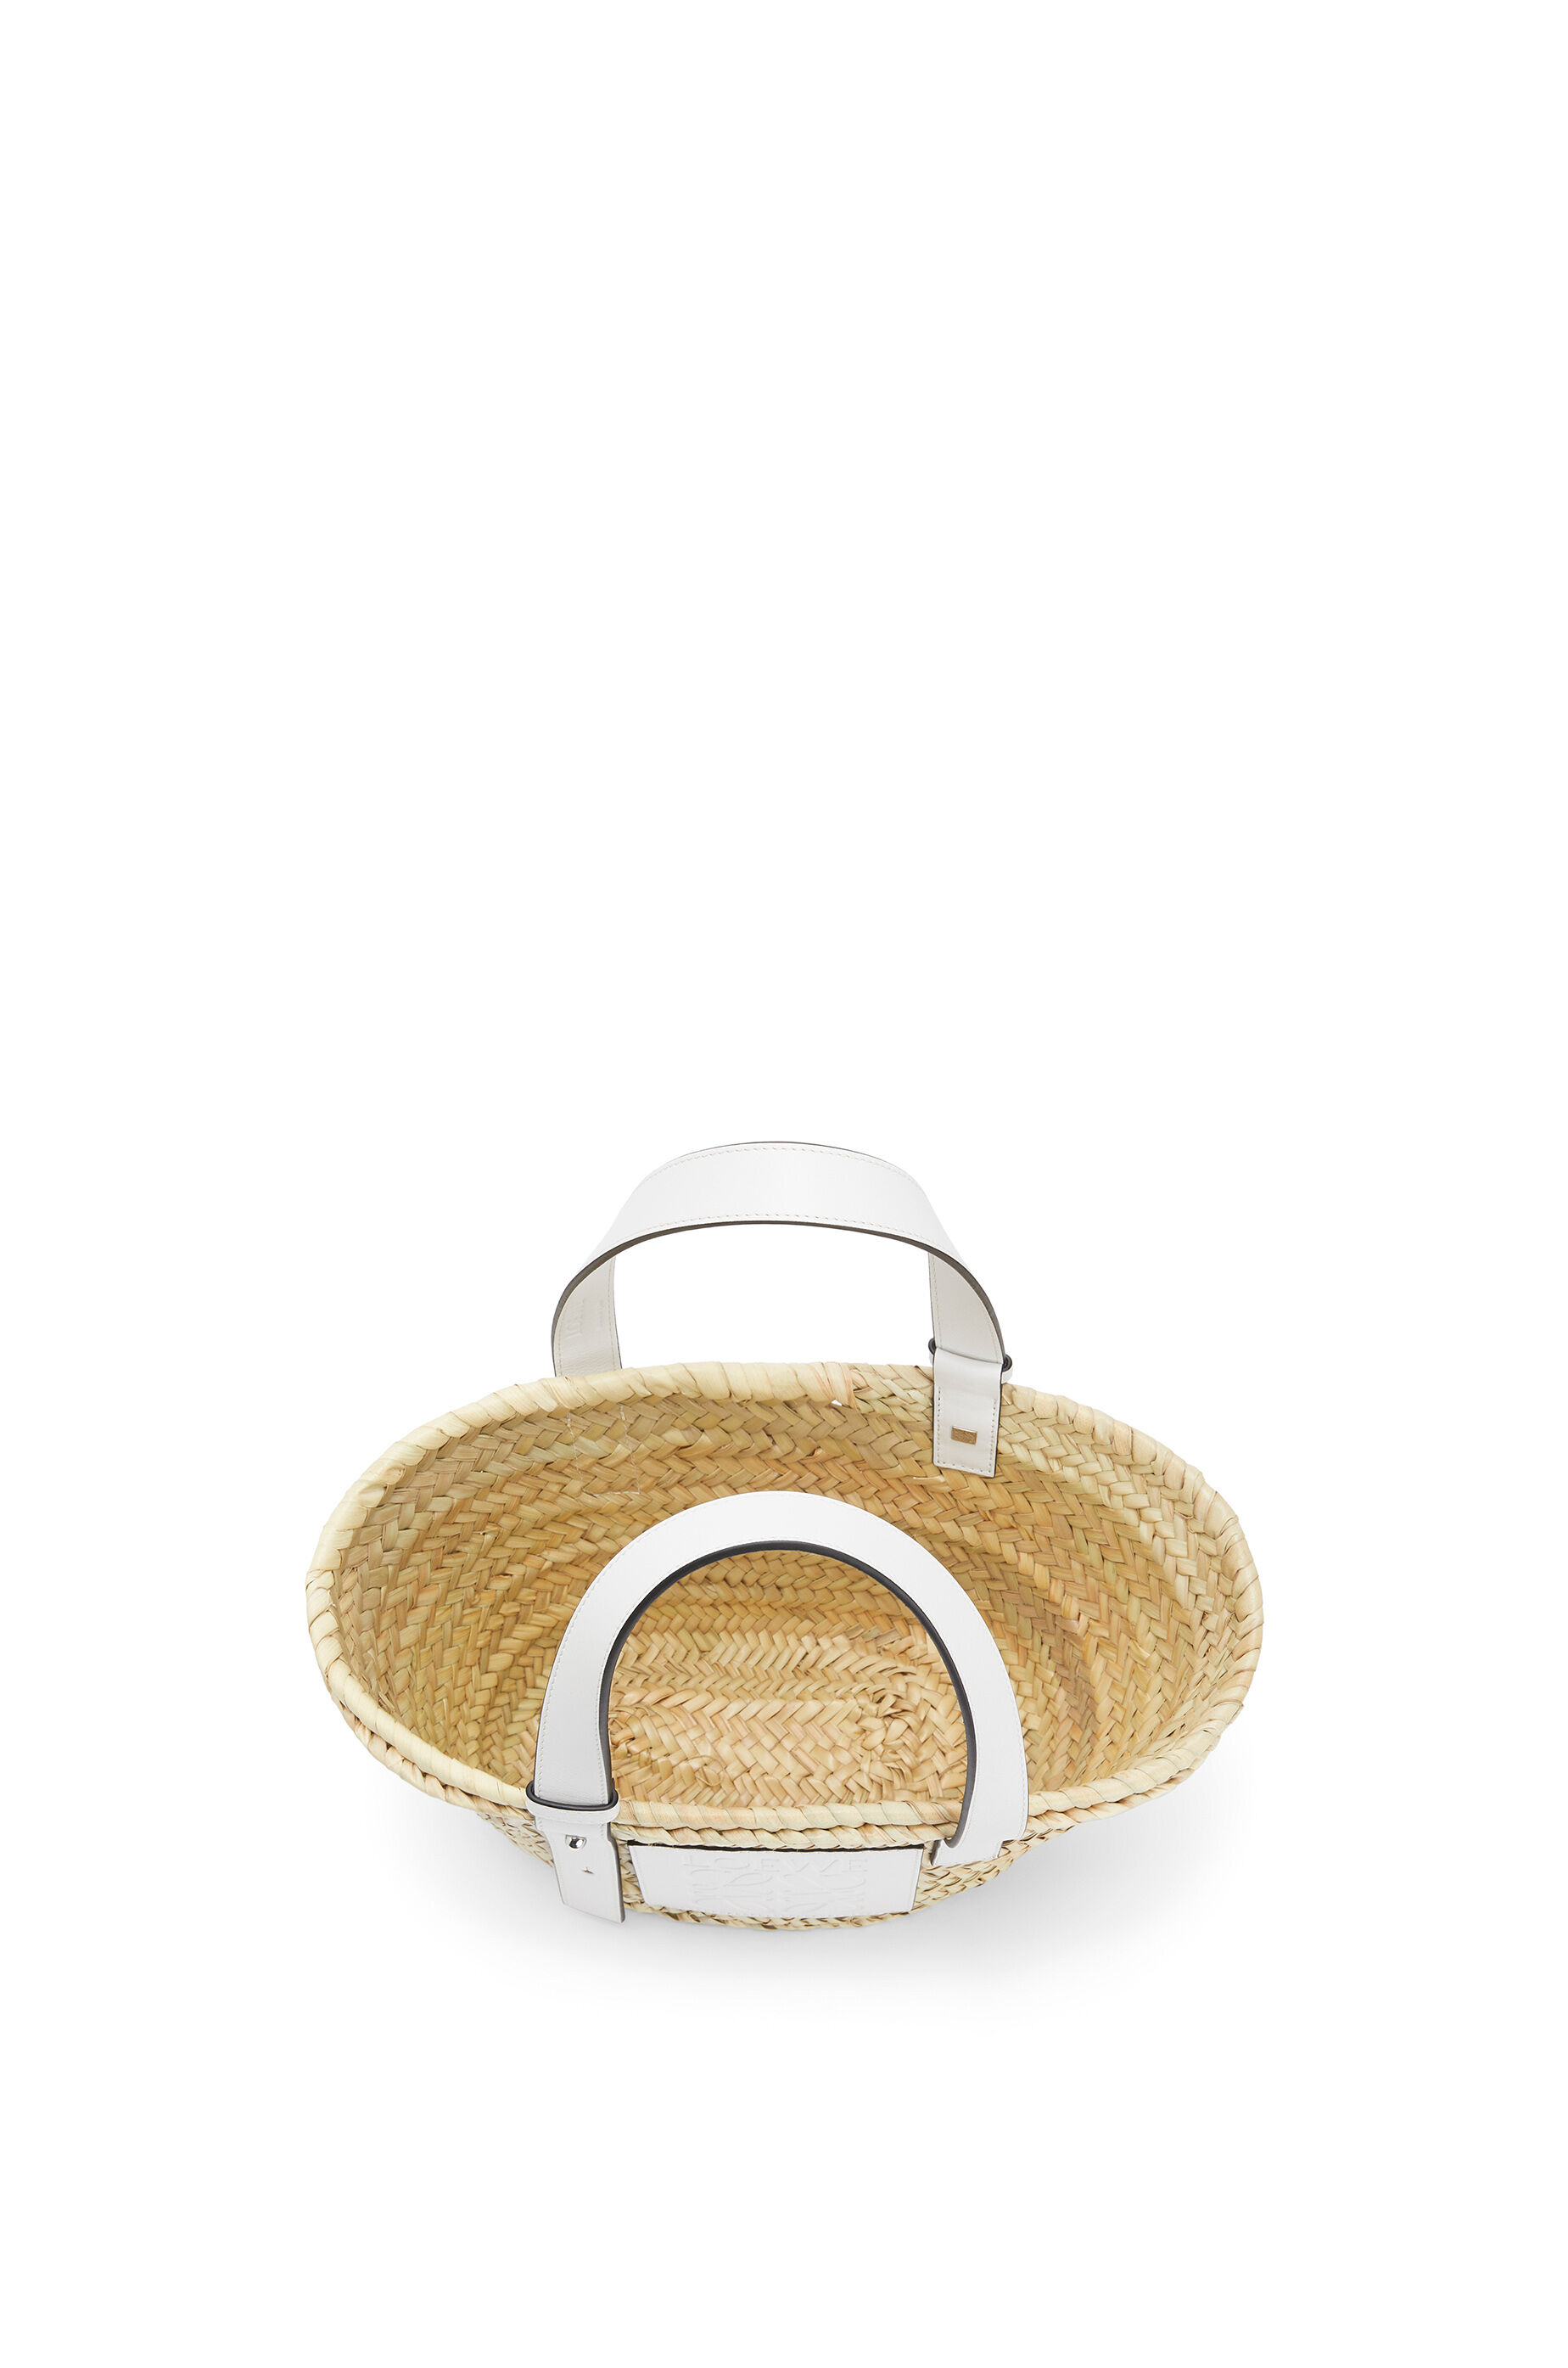 Small Basket bag in palm leaf and calfskin Natural/White - LOEWE